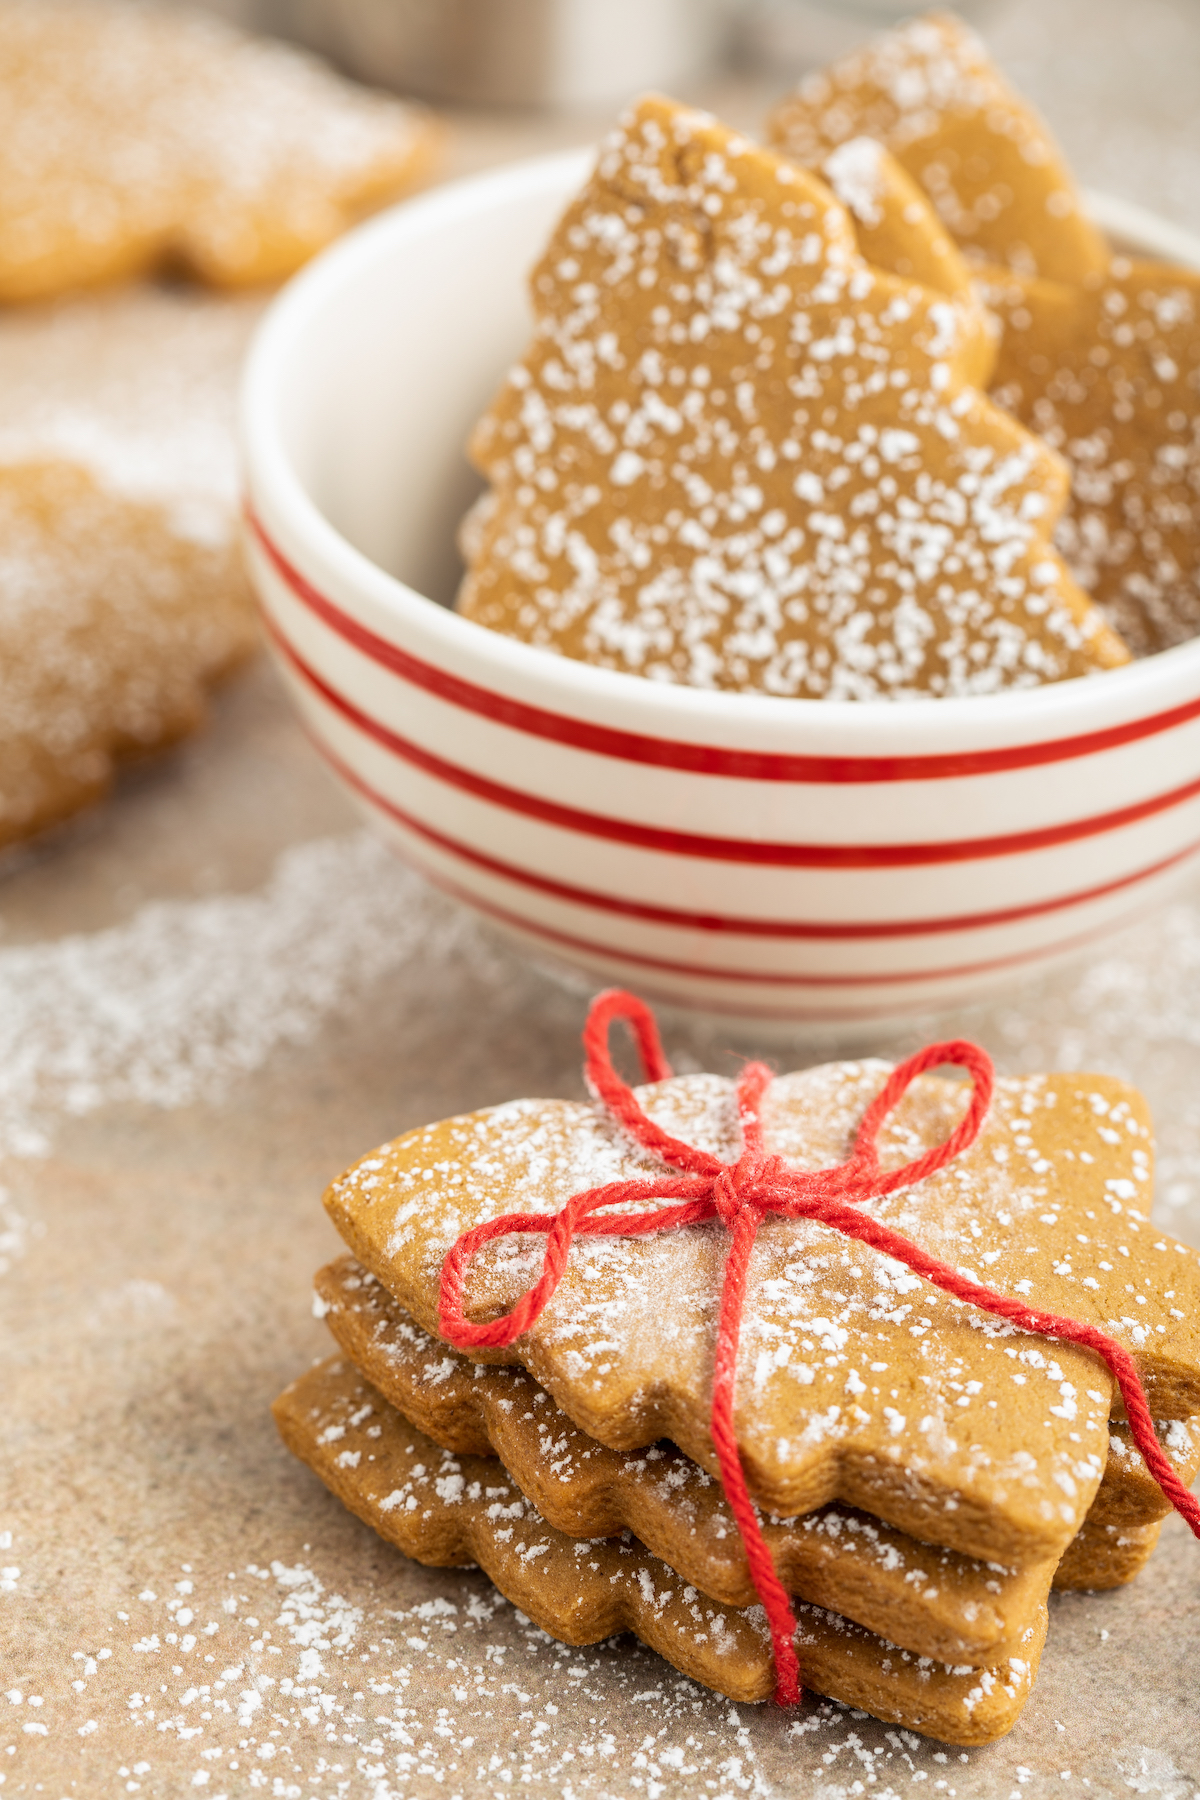 Molasses cookies cut into the shape of Christmas trees, dusted with powdered sugar, and tied with red string.